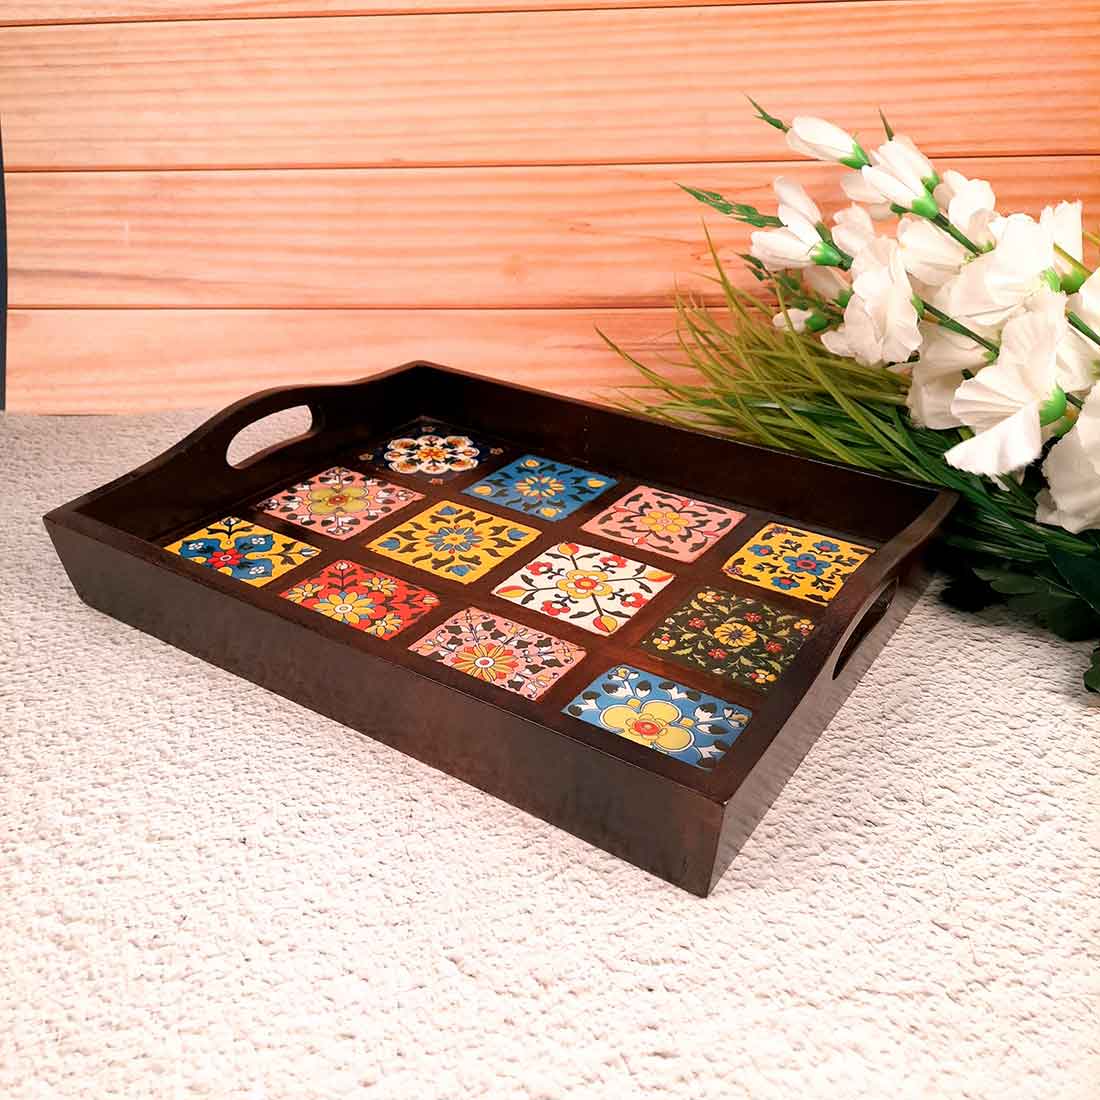 Wooden Tray With Ceramic Tile Base - For Serving, Kitchen, Dining Table Decor - 15 inch- Apkamart